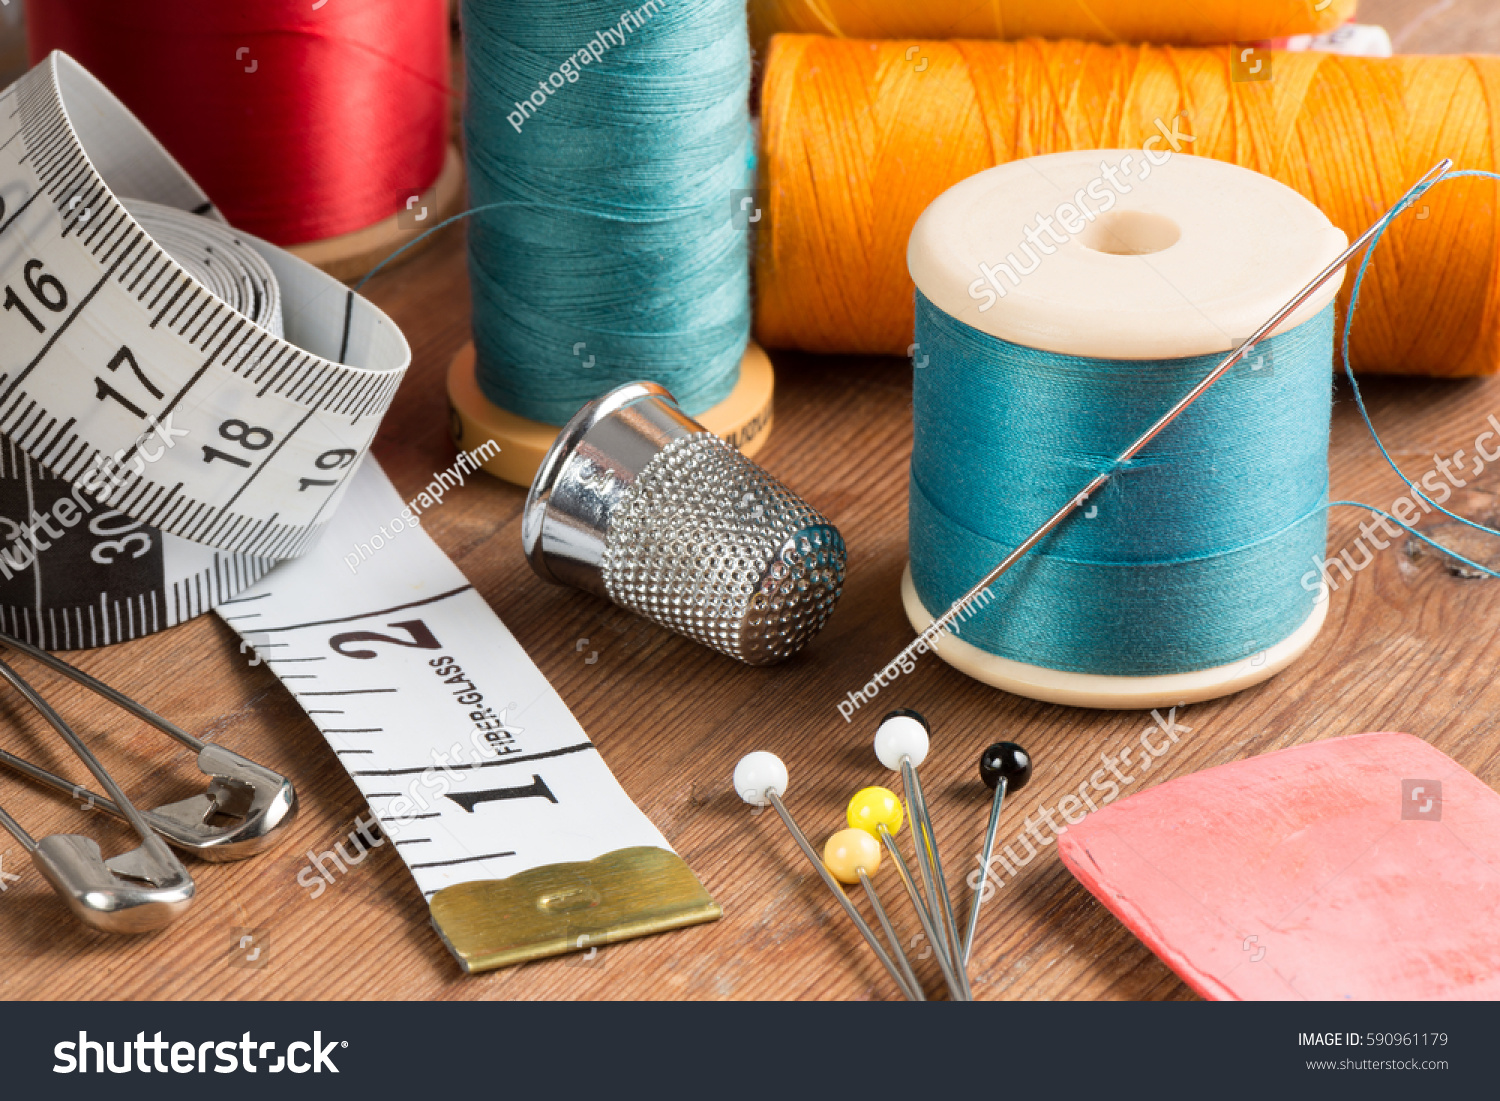 Spools of thread and basic sewing tools including pins, needle, a thimble, and tape measure on a wooden tabletop #590961179